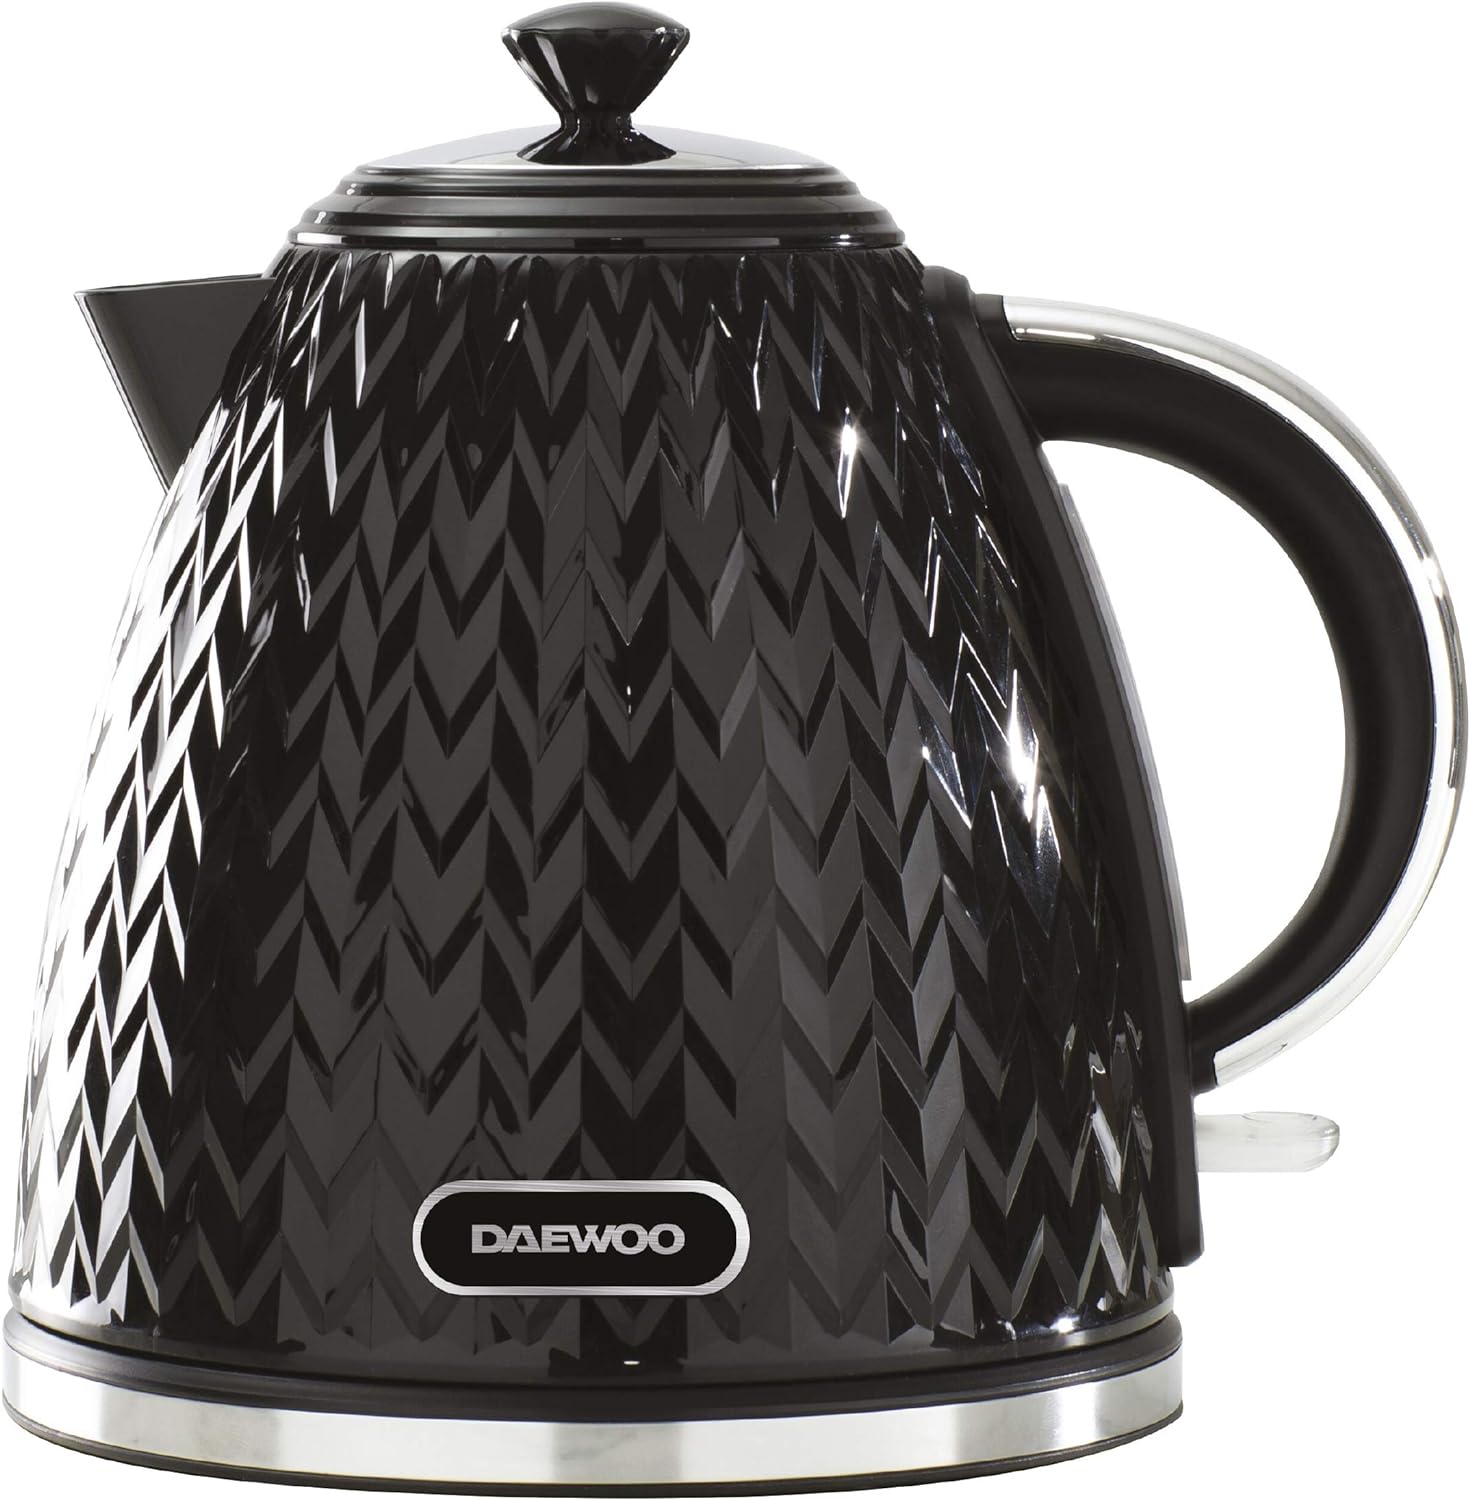 Daewoo SDA1773 Argyle 1.7L Plastic Kettle | Removable & Washable Limescale Filter Lid Opening | Auto/Manual Switch Off Options | 220-240V/50-60Hz/3KW | Concealed Heating Element-Black